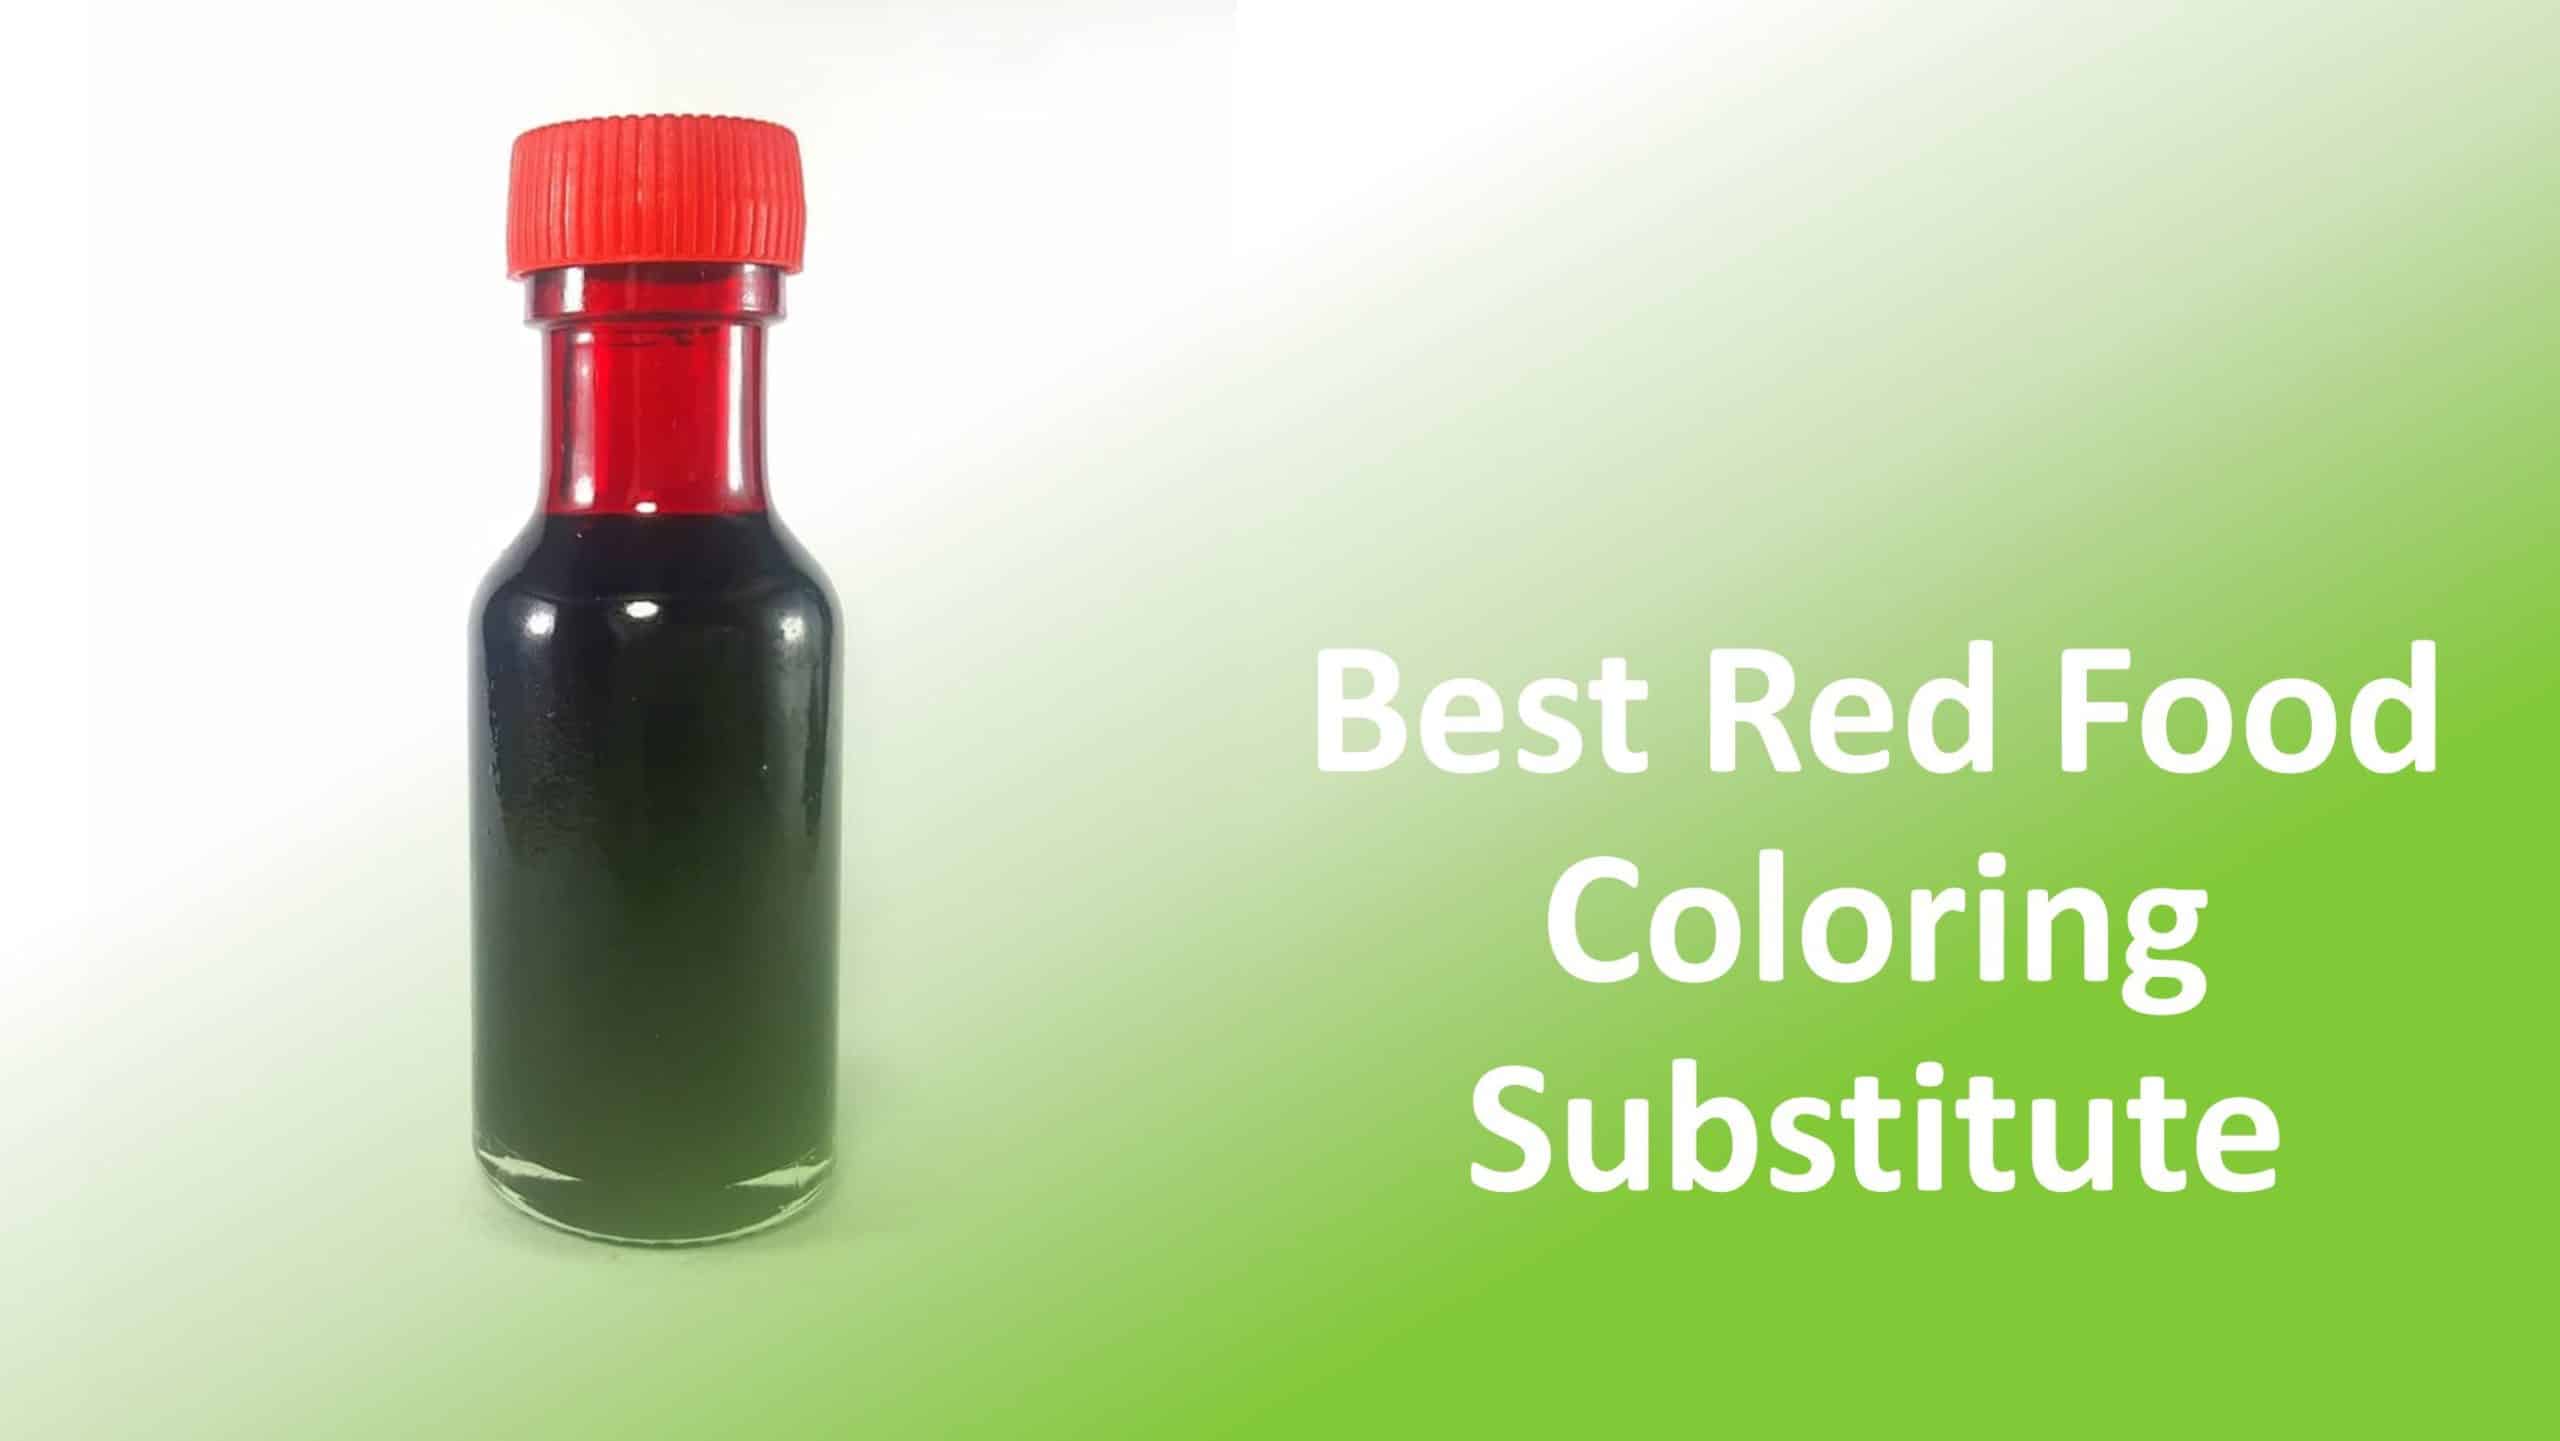 https://www.foodchamps.org/wp-content/uploads/2021/11/best-red-food-coloring-substitute-scaled.jpg